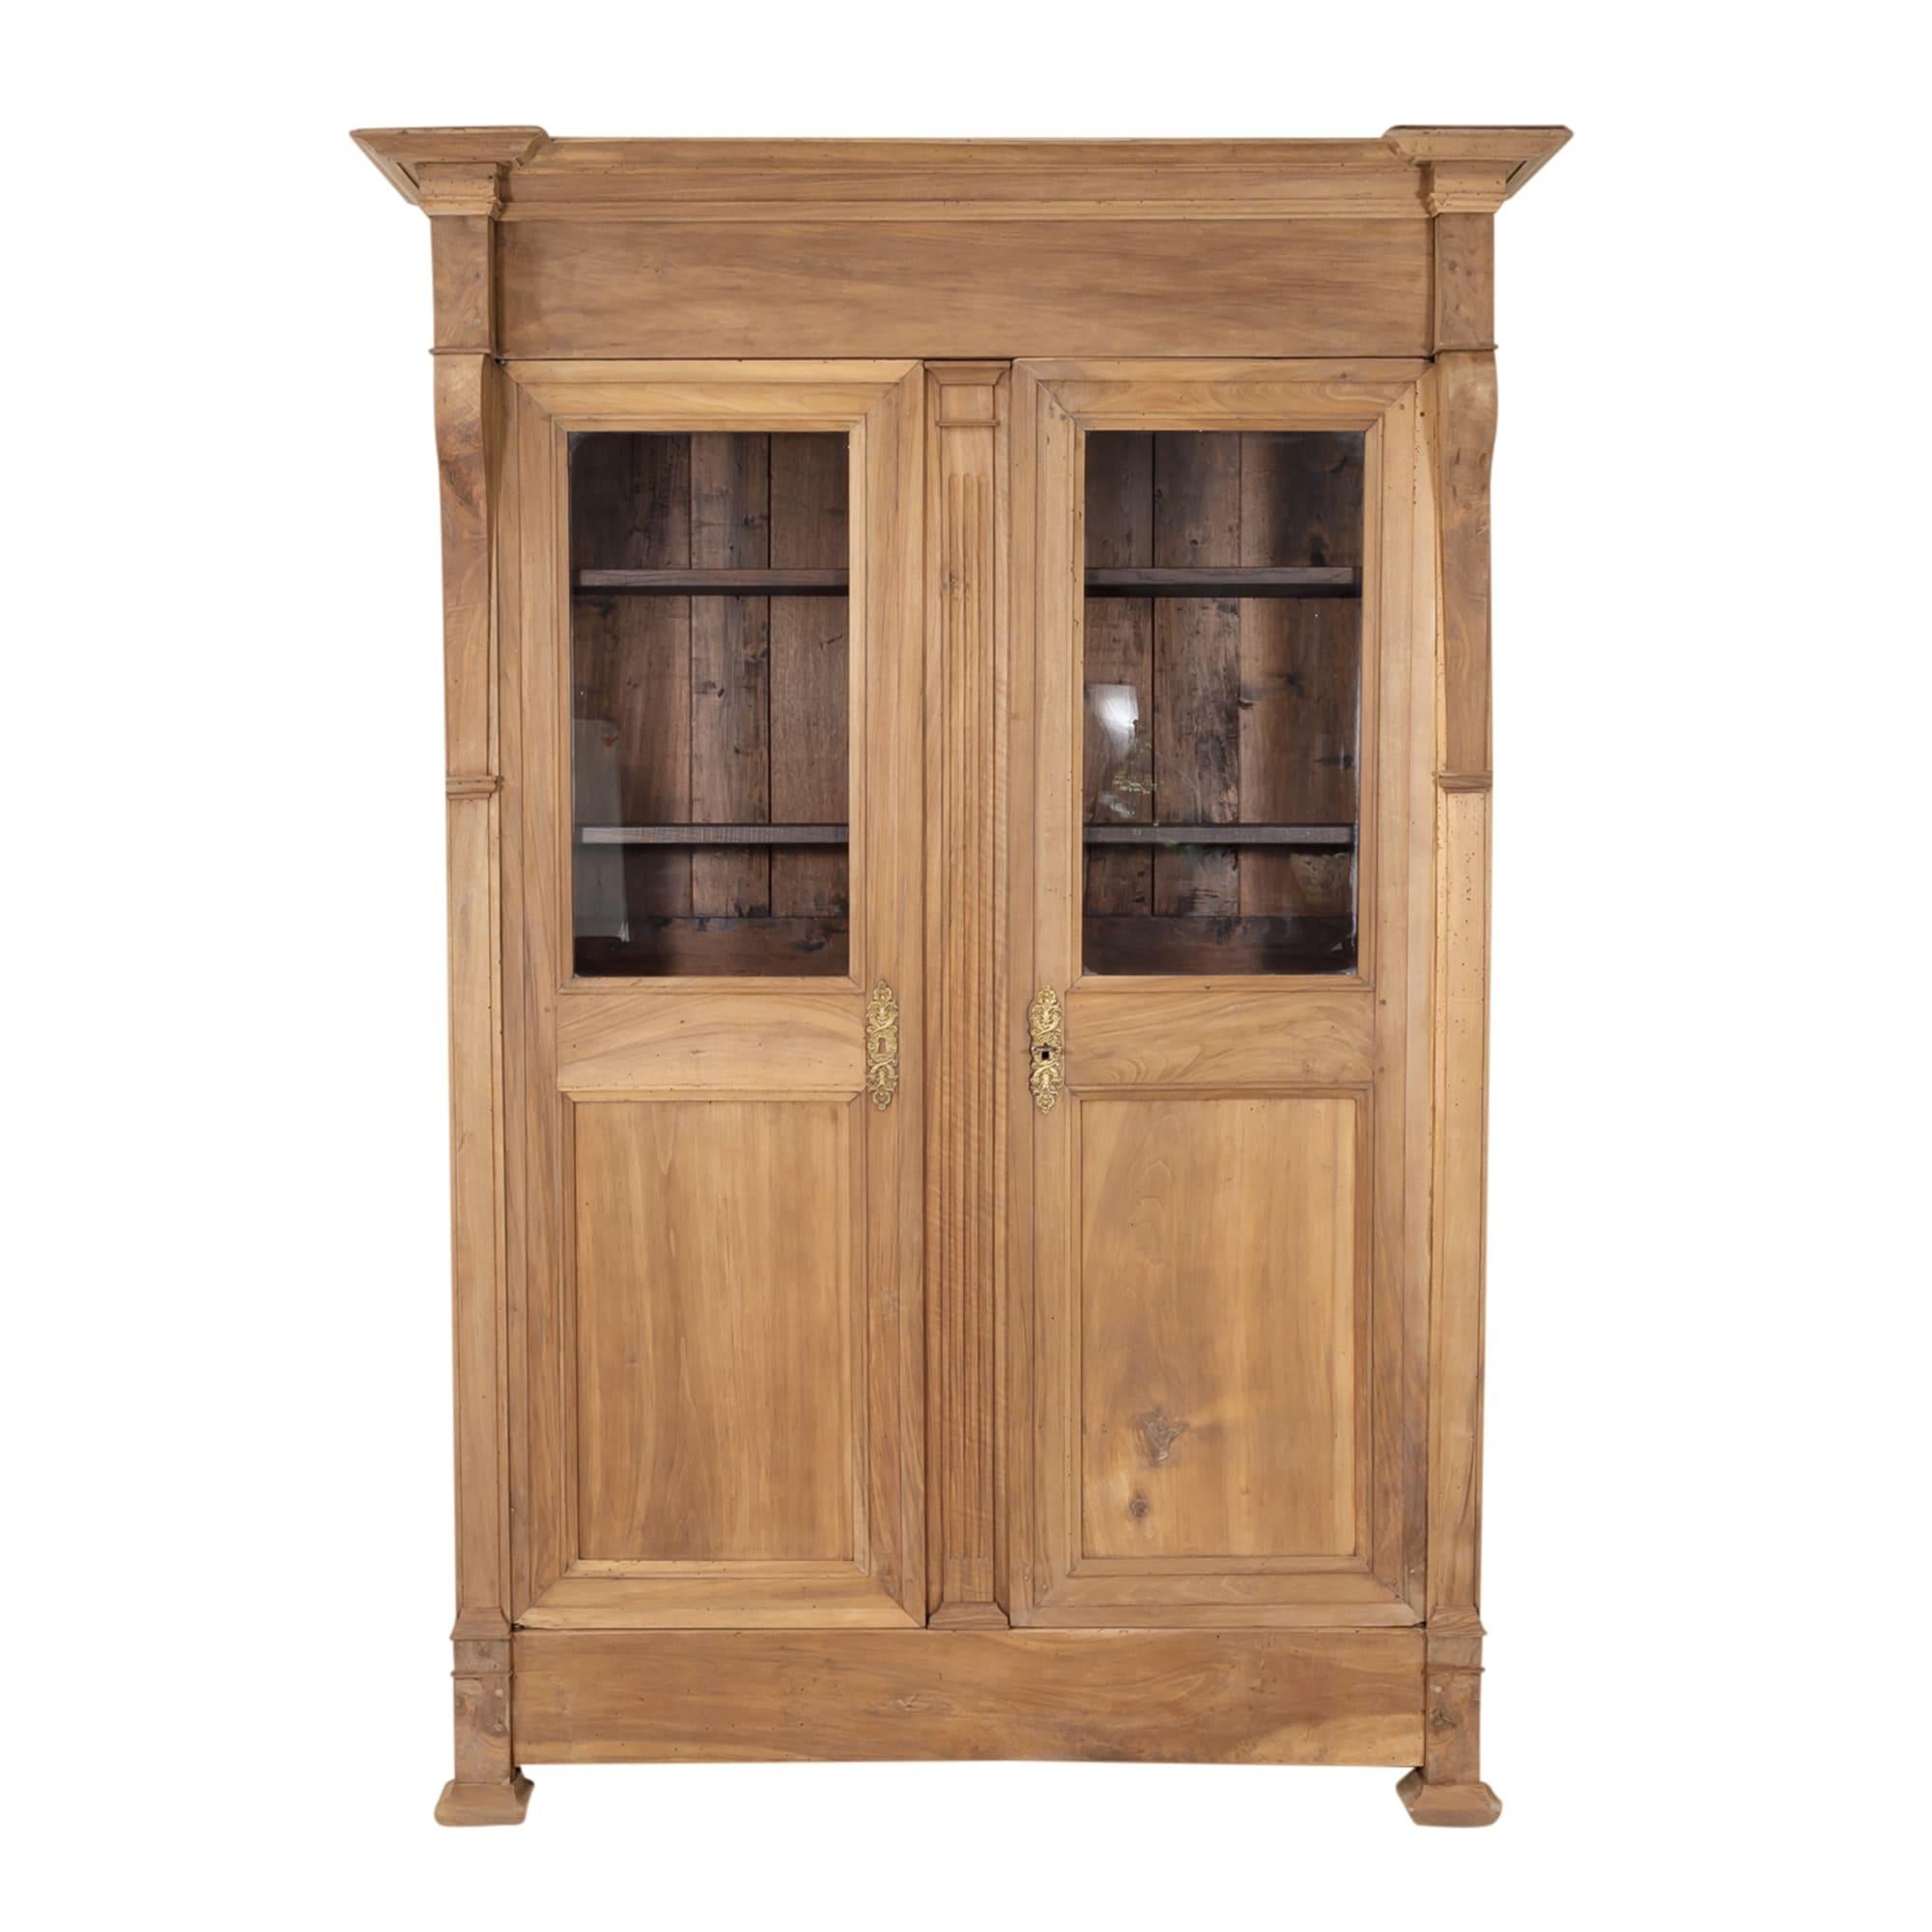 19th century French restauration period bibliotheque handcrafted of walnut in the South of France, circa 1820s. This handsome bookcase with its warm bleached patina features a stepped cornice over paneled doors with the original glass flanked by